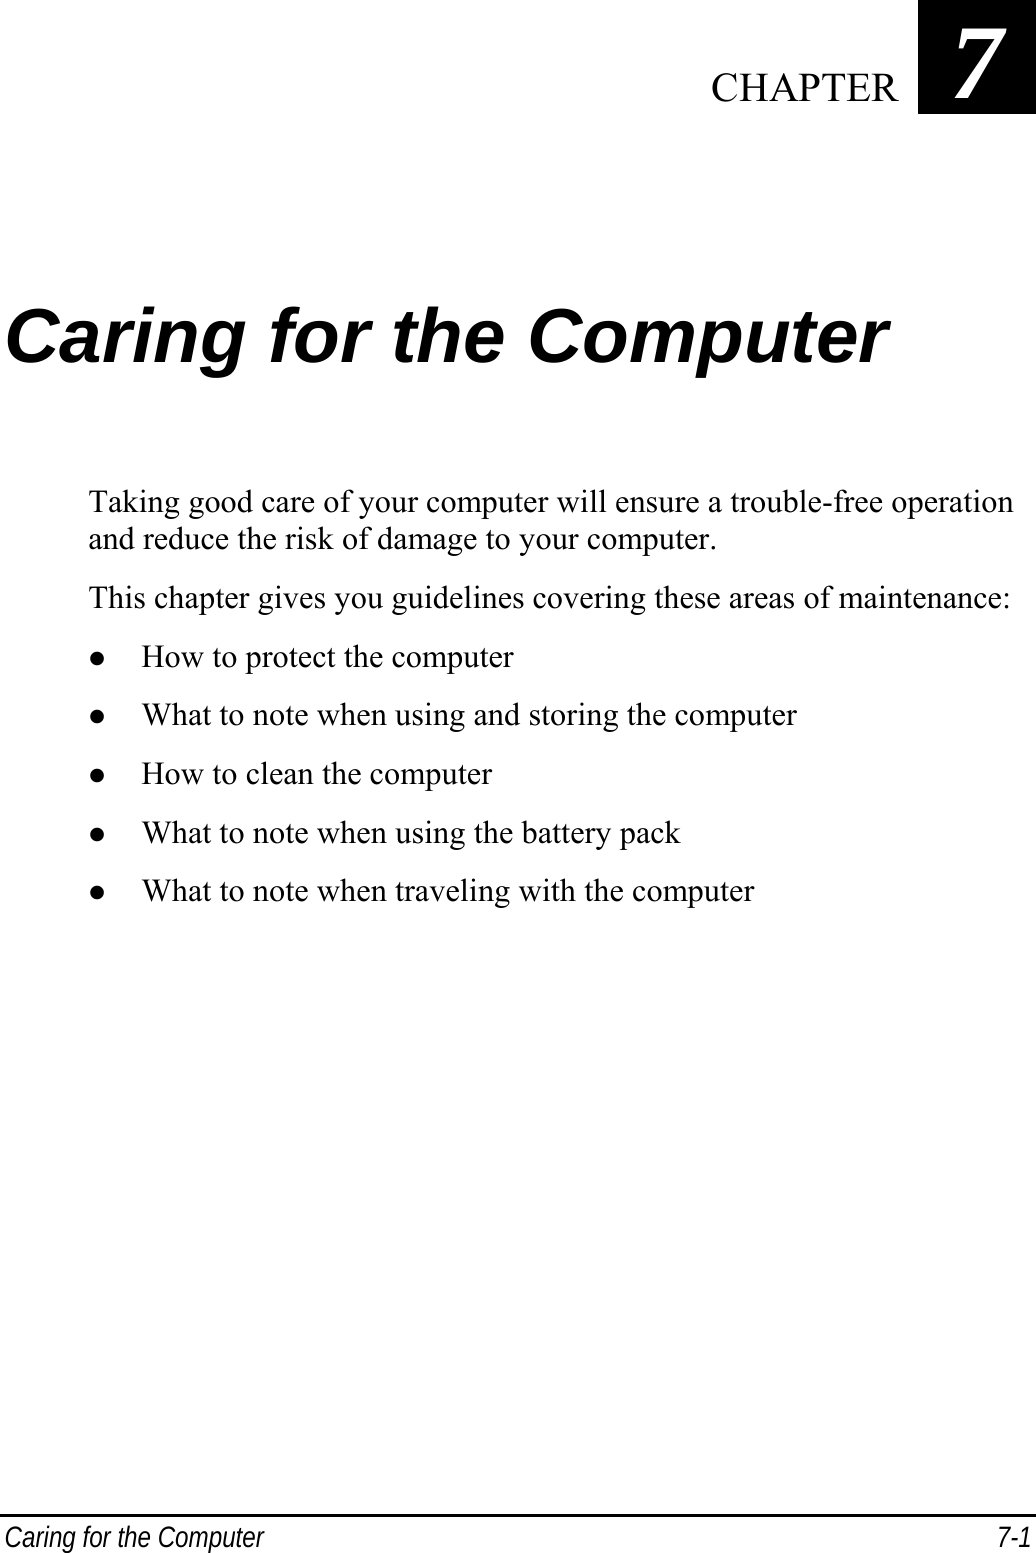  Caring for the Computer  7-1 Chapter   7 Caring for the Computer Taking good care of your computer will ensure a trouble-free operation and reduce the risk of damage to your computer. This chapter gives you guidelines covering these areas of maintenance: z How to protect the computer z What to note when using and storing the computer z How to clean the computer z What to note when using the battery pack z What to note when traveling with the computer  CHAPTER 